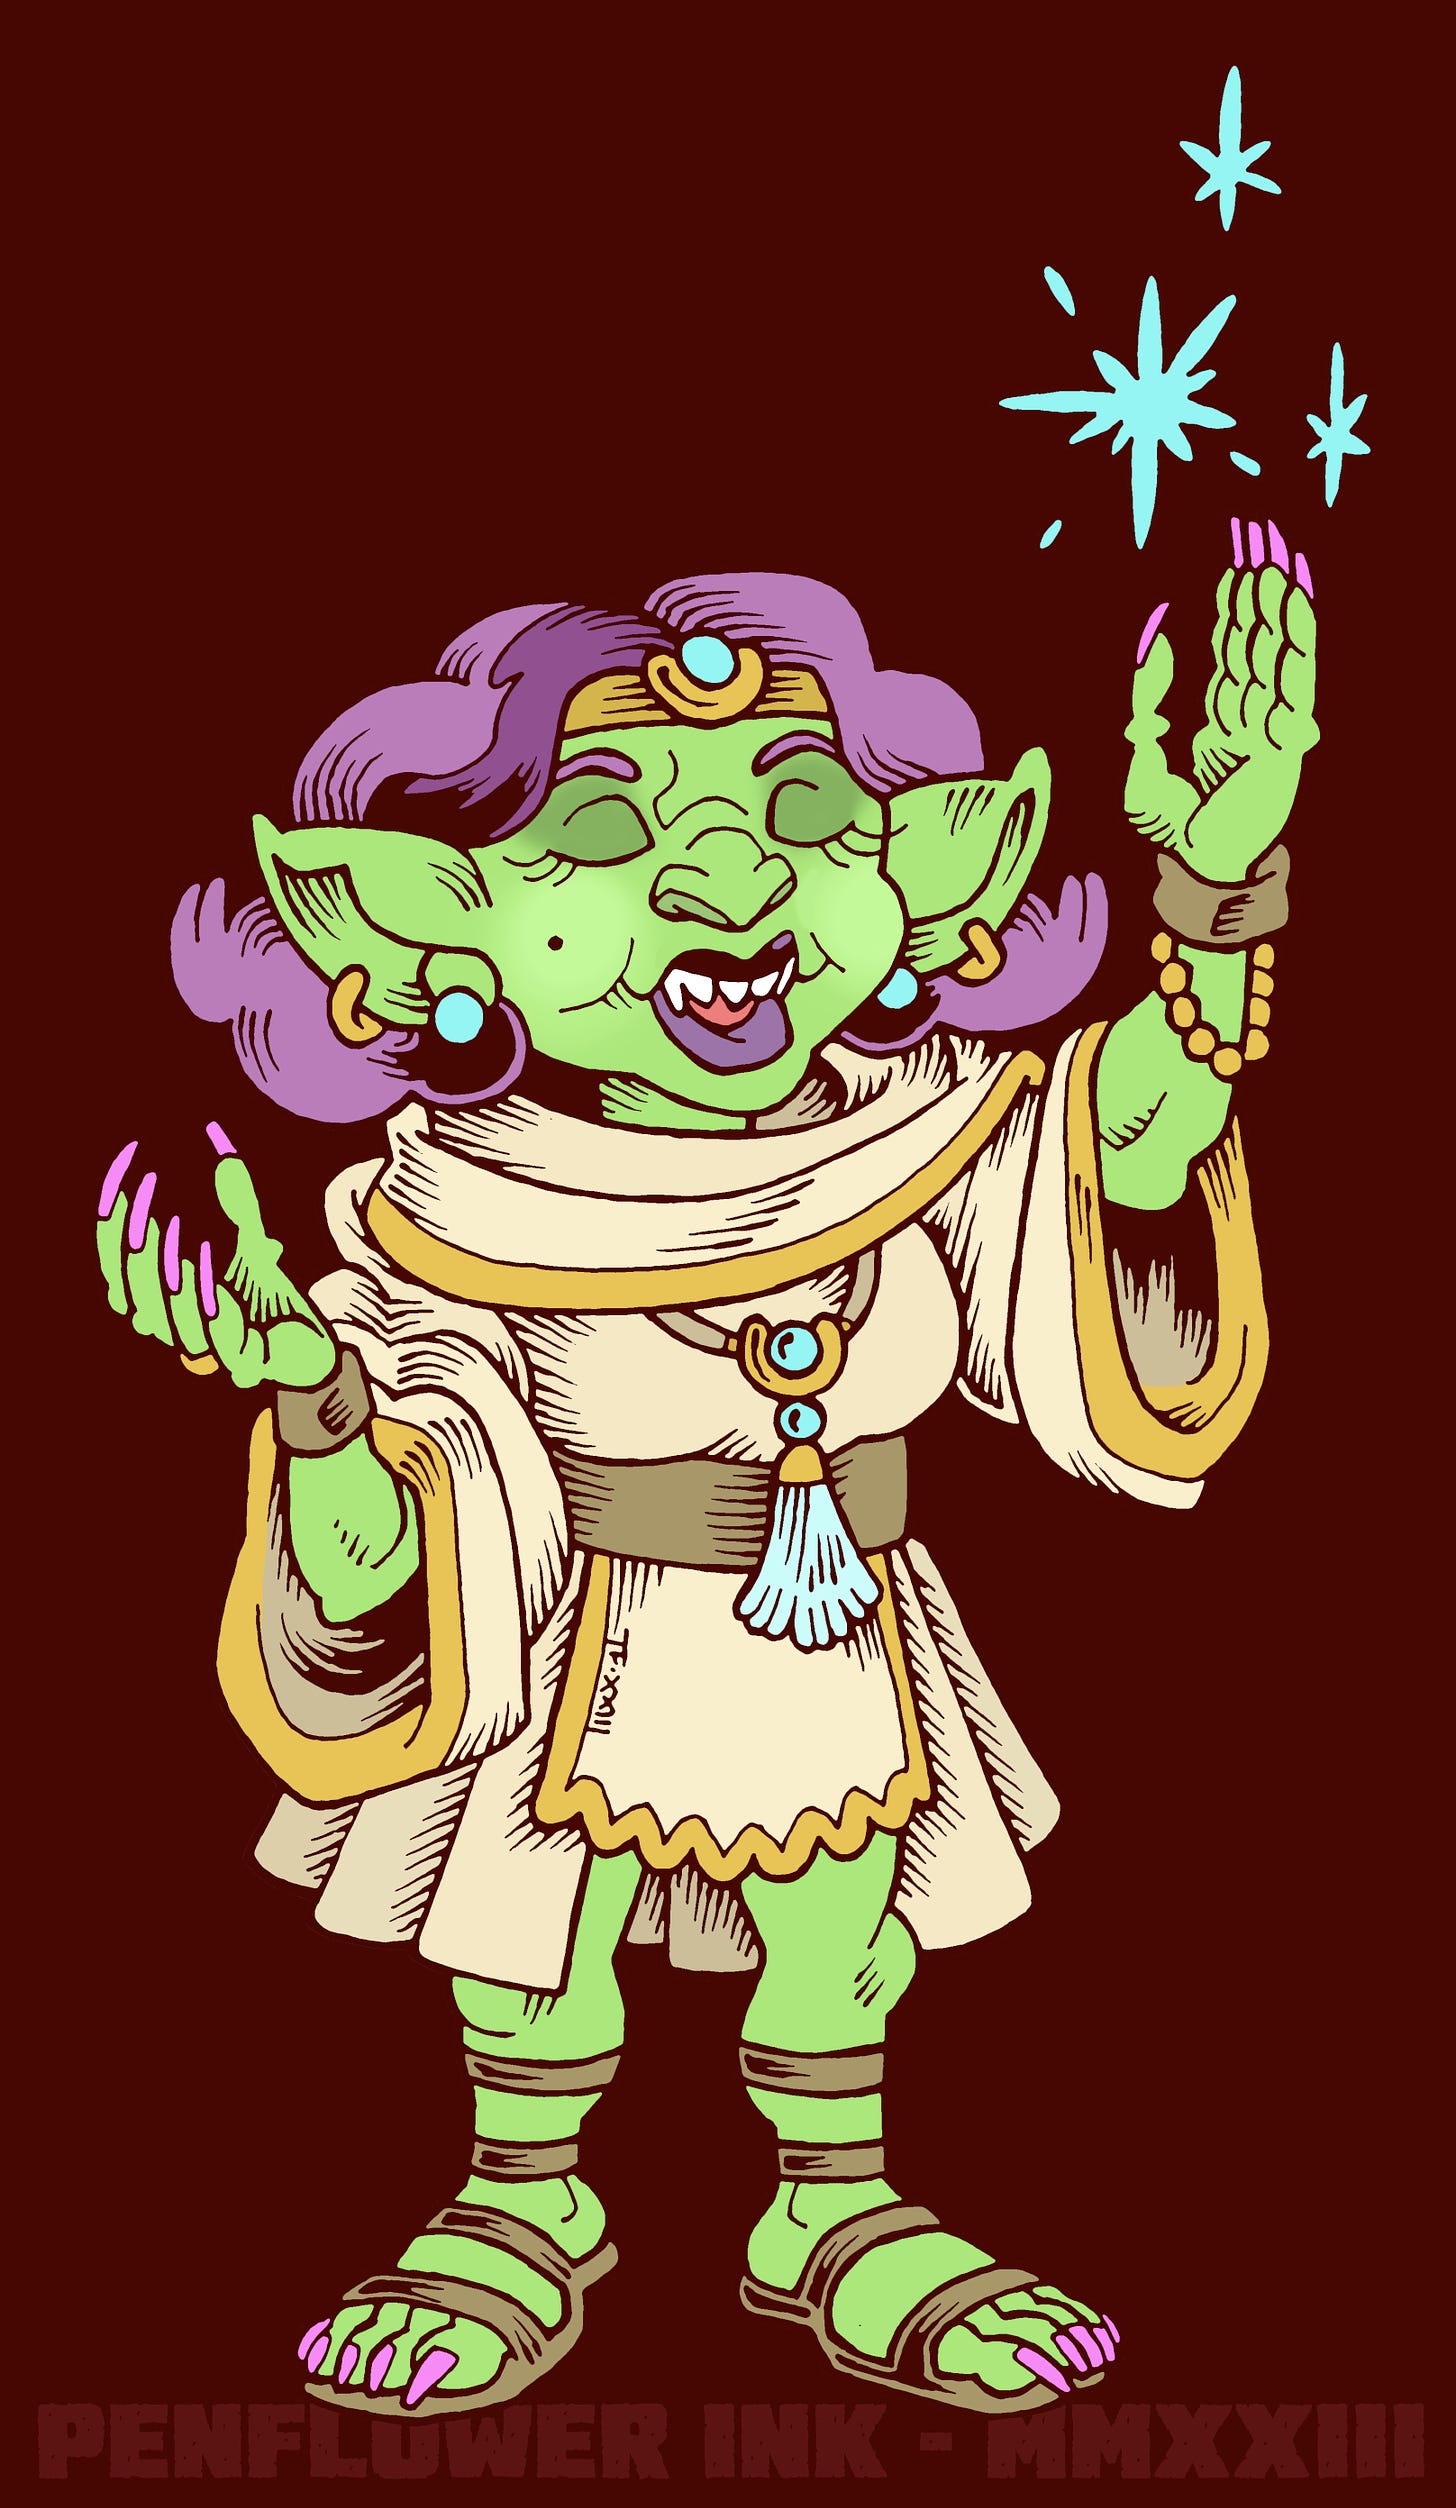 Traditionally hand-drawn and digitally coloured illustration of a female goblin with green skin and pink hair. She is wearing cream coloured robes with gold trim, along with sandals, a head-band adorned with a blue pearl, and pink nail varnish. She has make-up and jewellery, and has one hand raised, casting a blue magic spell.